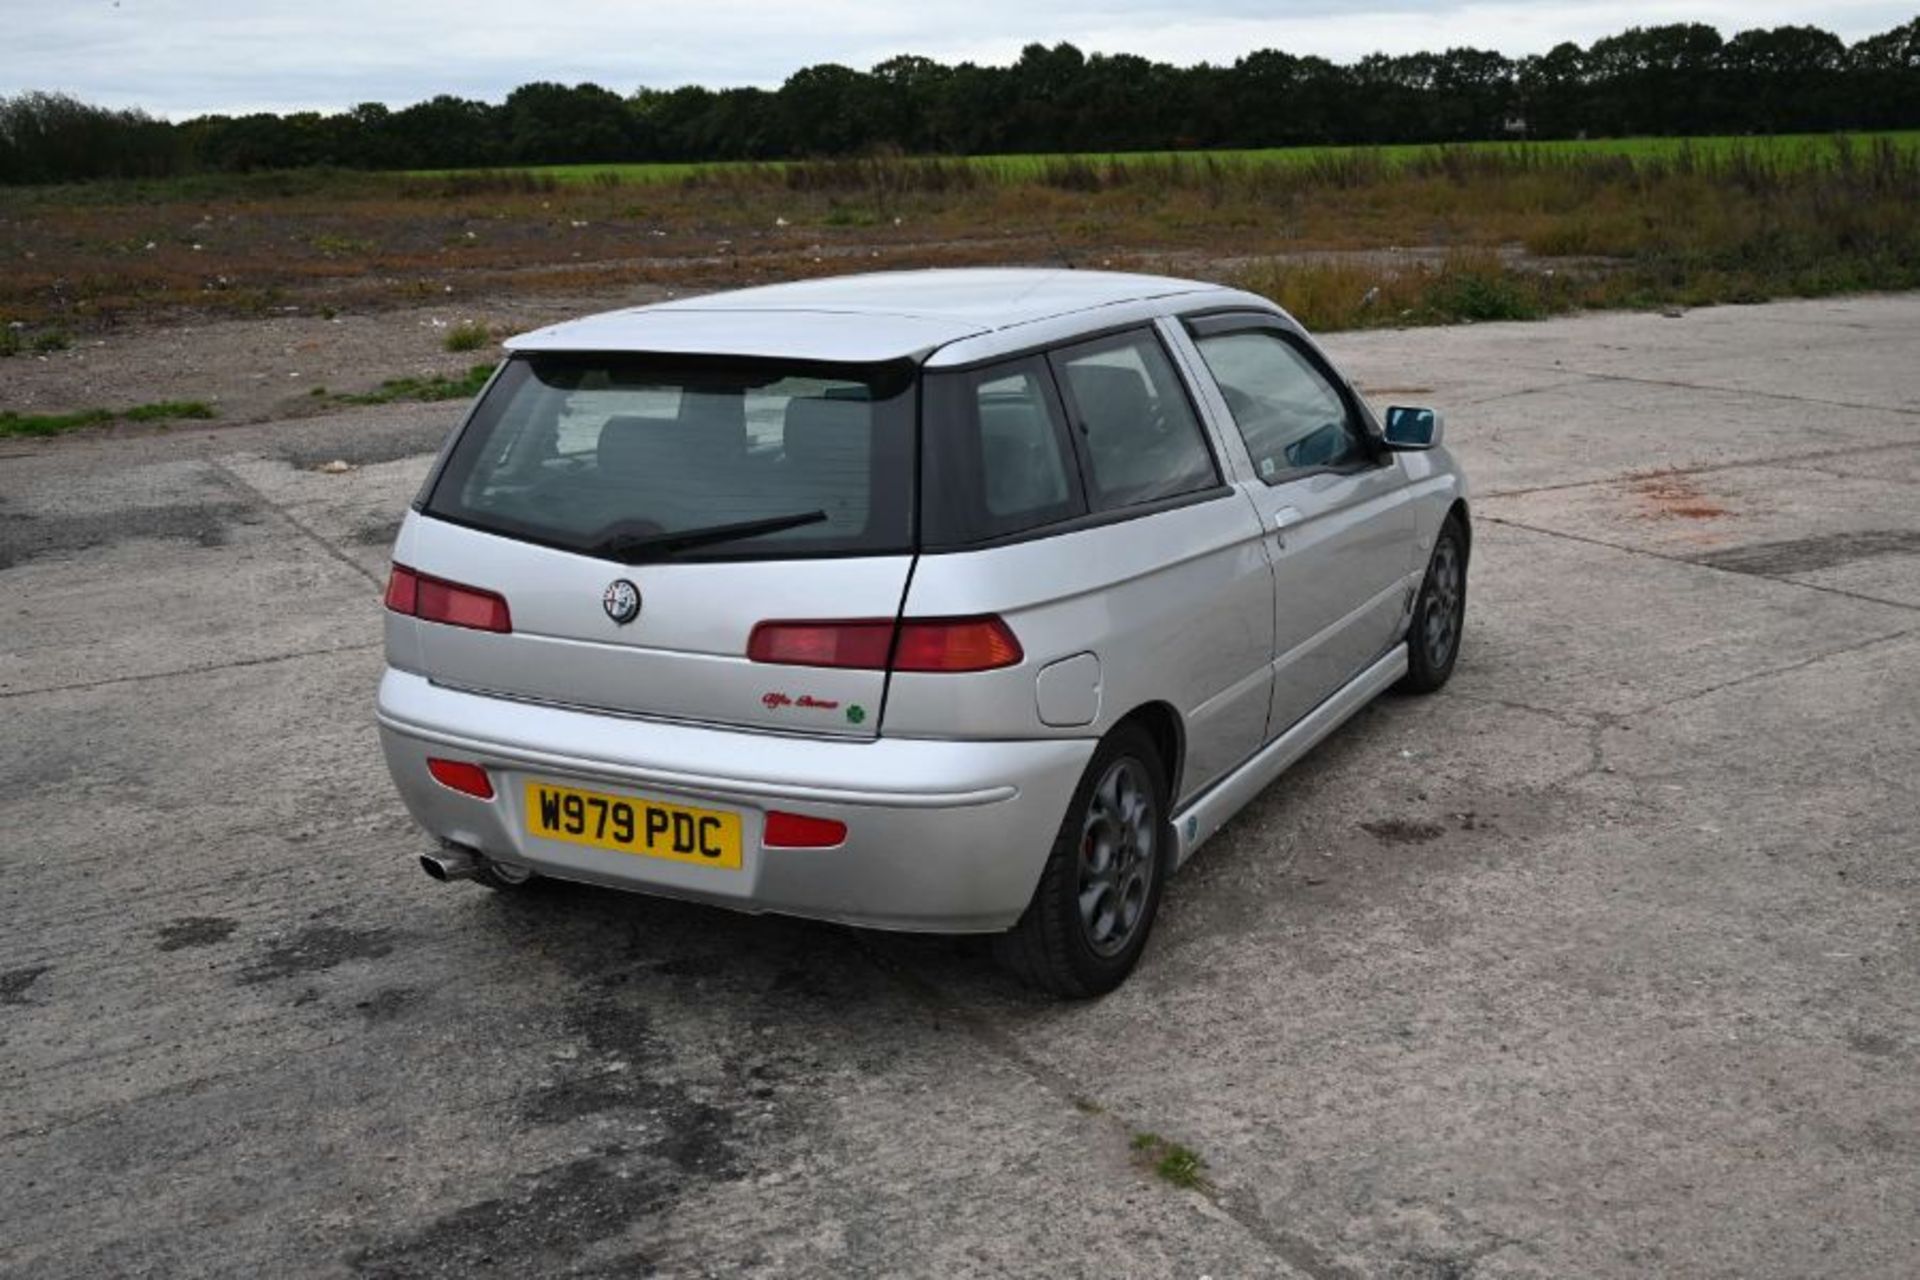 2000 Alfa Romeo 145 Clover Leaf. One of the very last UK registered examples of Alfa’s 145 - Image 10 of 22